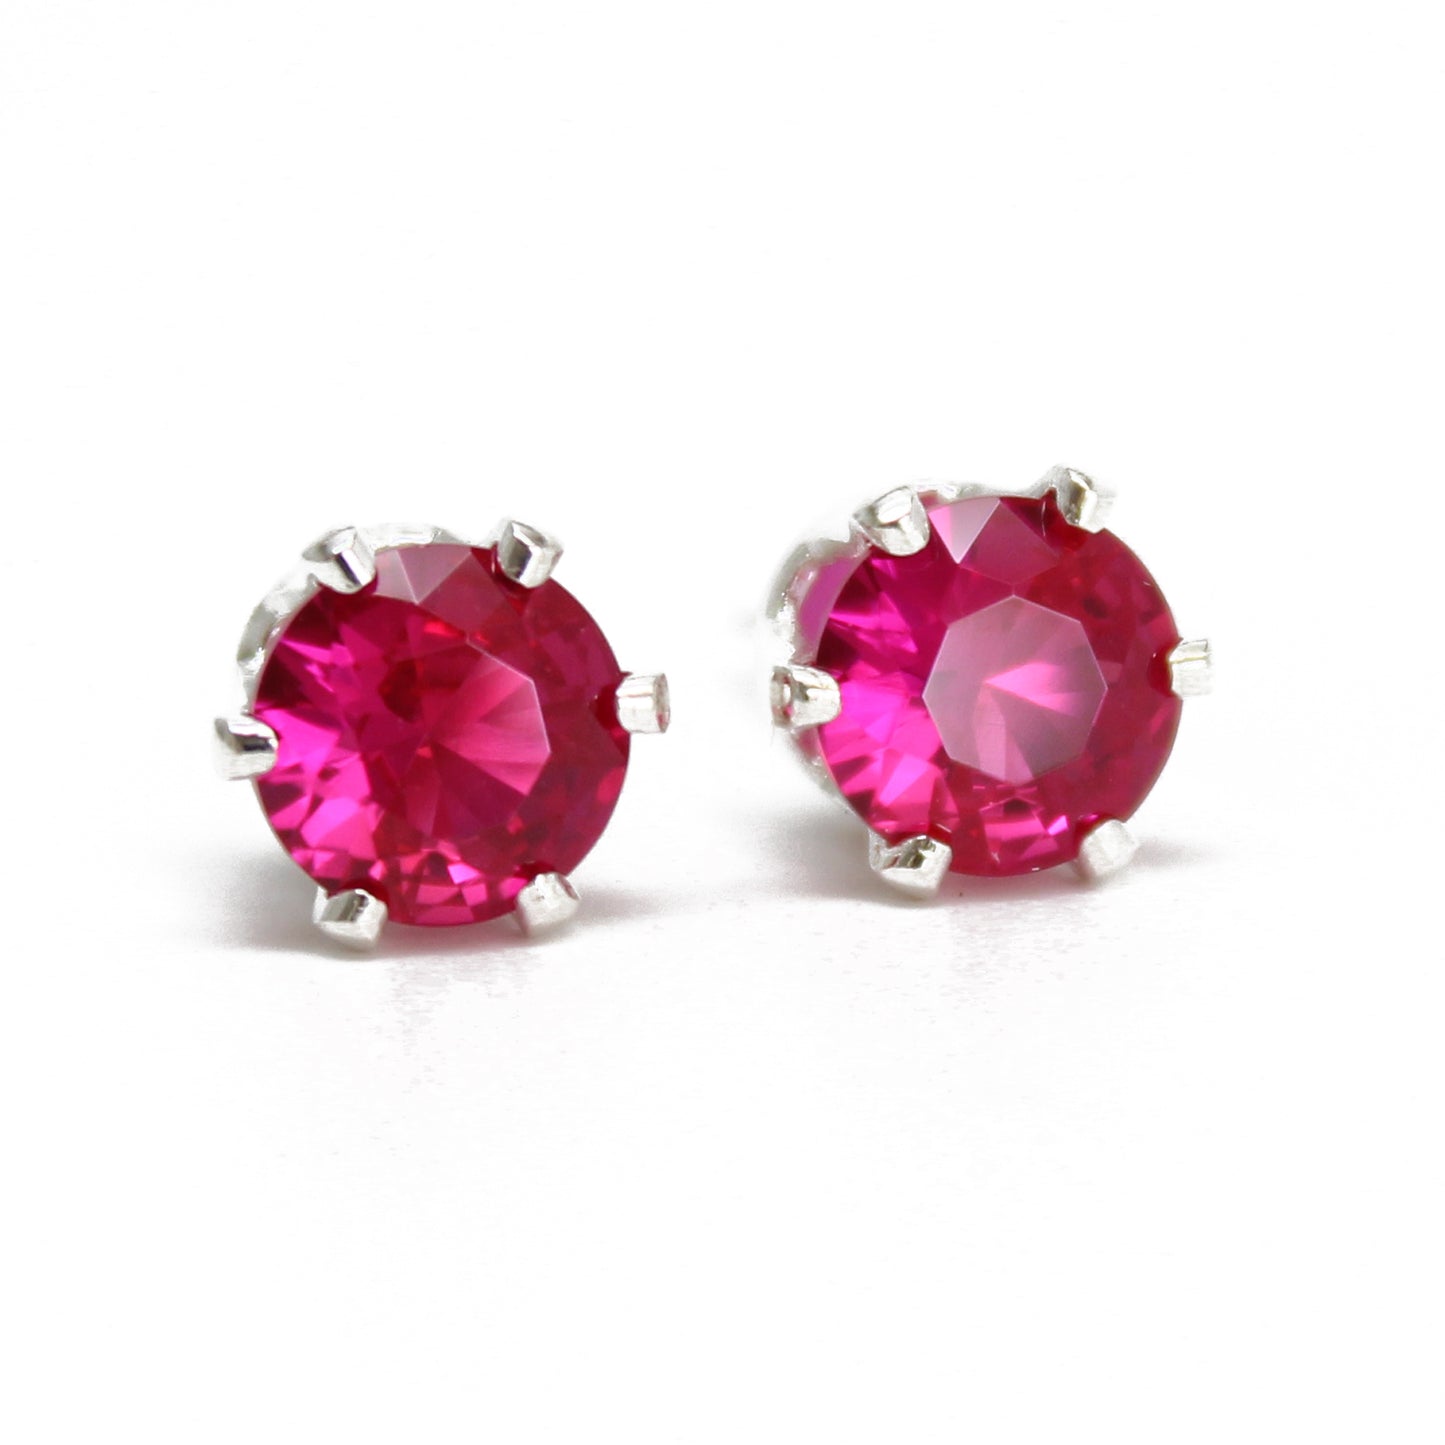 Parts of Four ruby stud earring - Silver